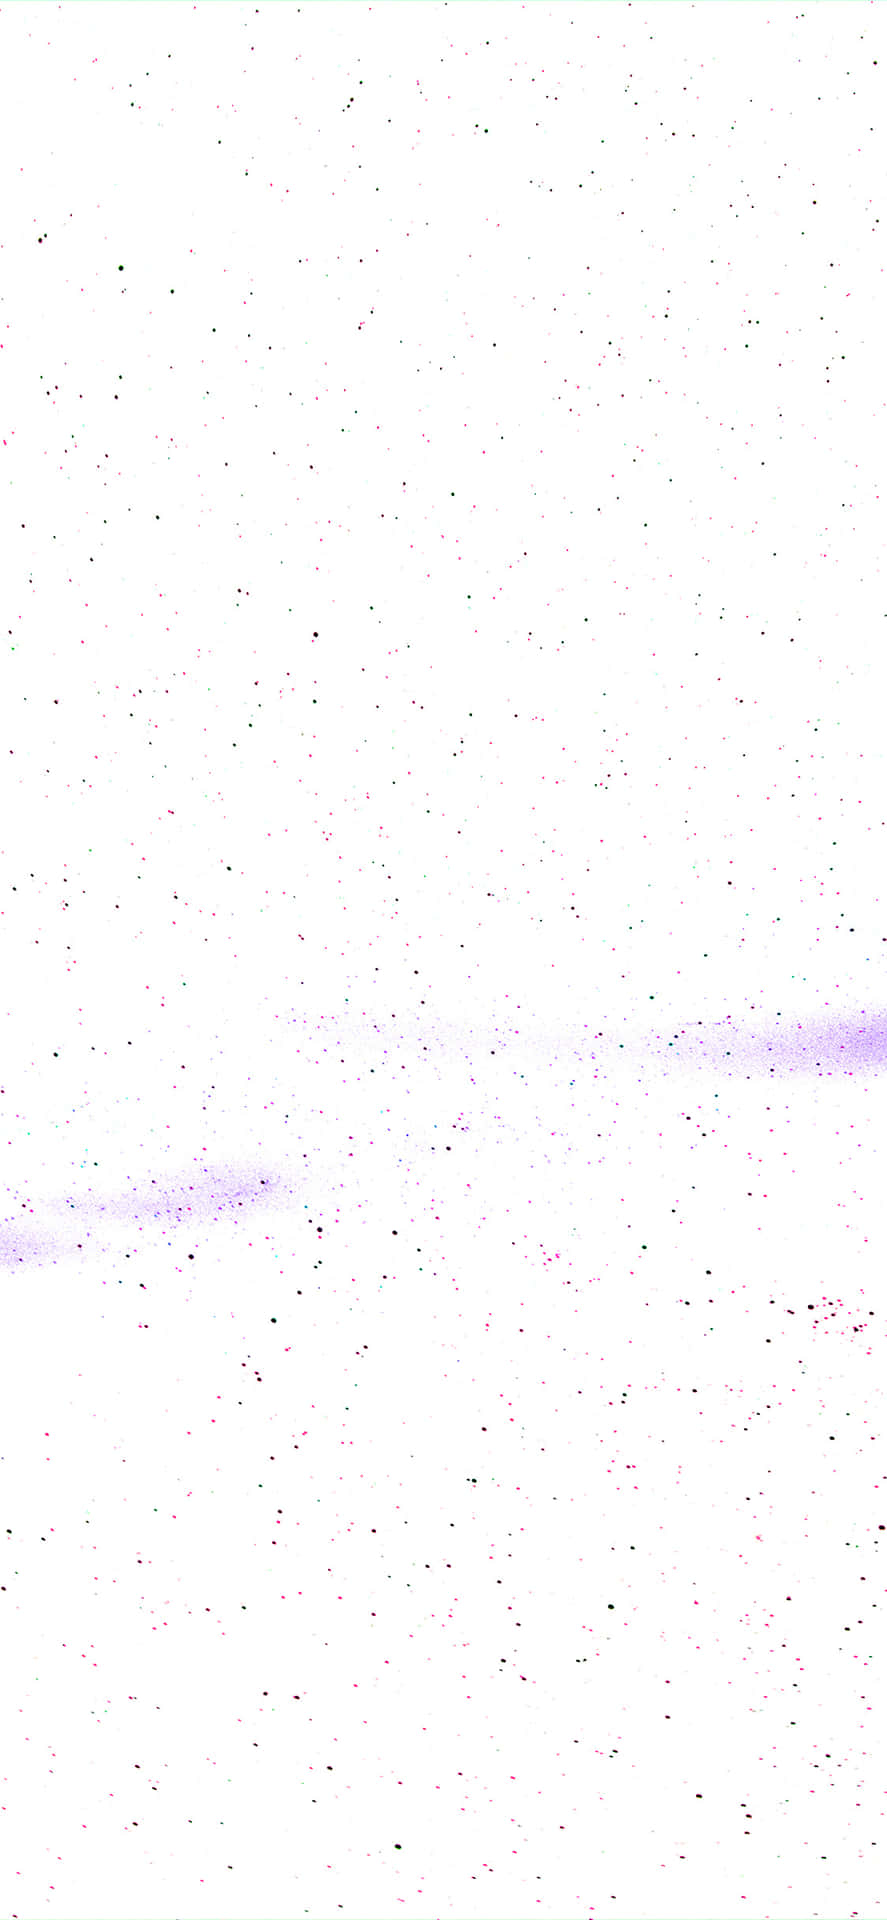 A Purple And White Image Of A Plane